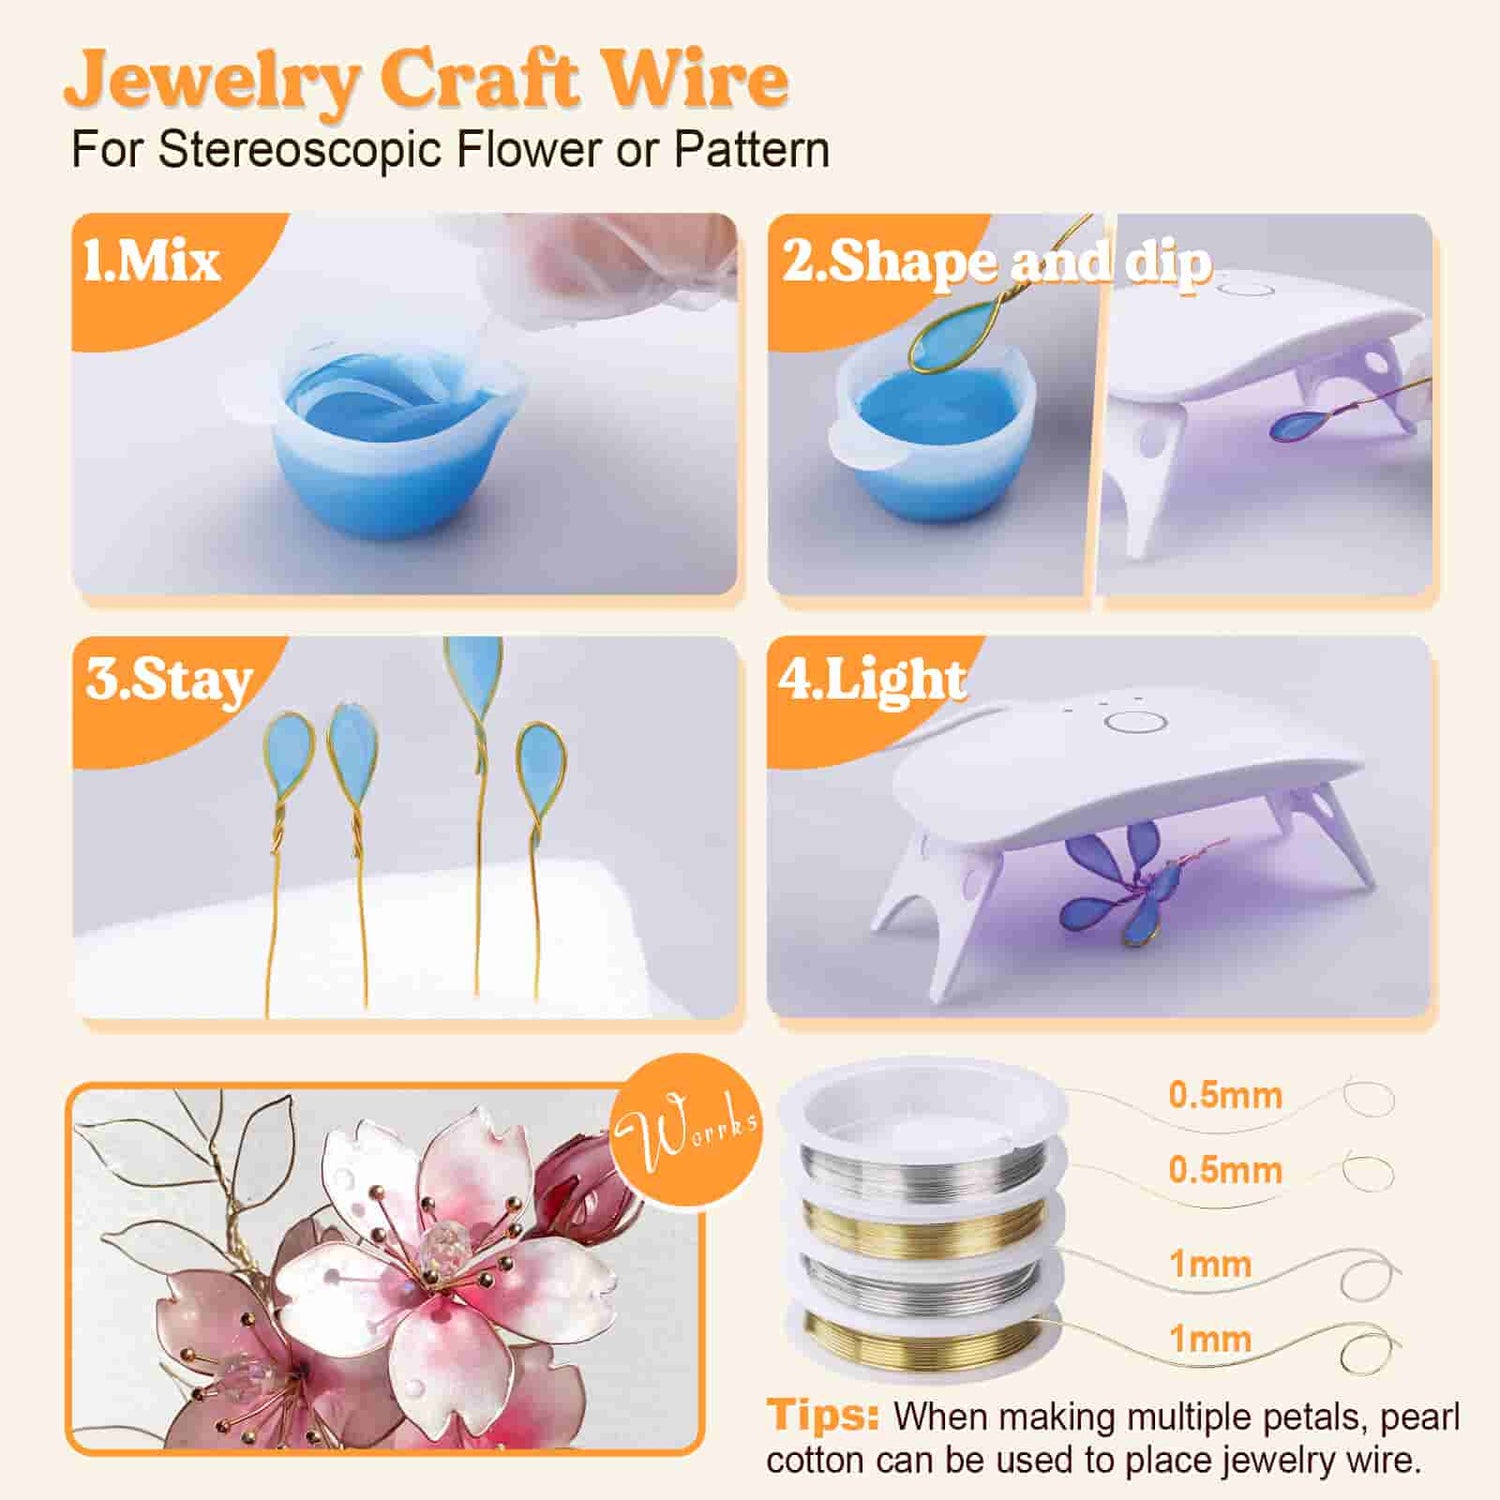 UV Resin Kit with Light,153Pcs Resin Jewelry Making Kit with Highly Clear UV  Resin, UV Lamp, Resin Accessories, Epoxy Resin Starter Kit for Keychain,  Jewelry – Let's Resin